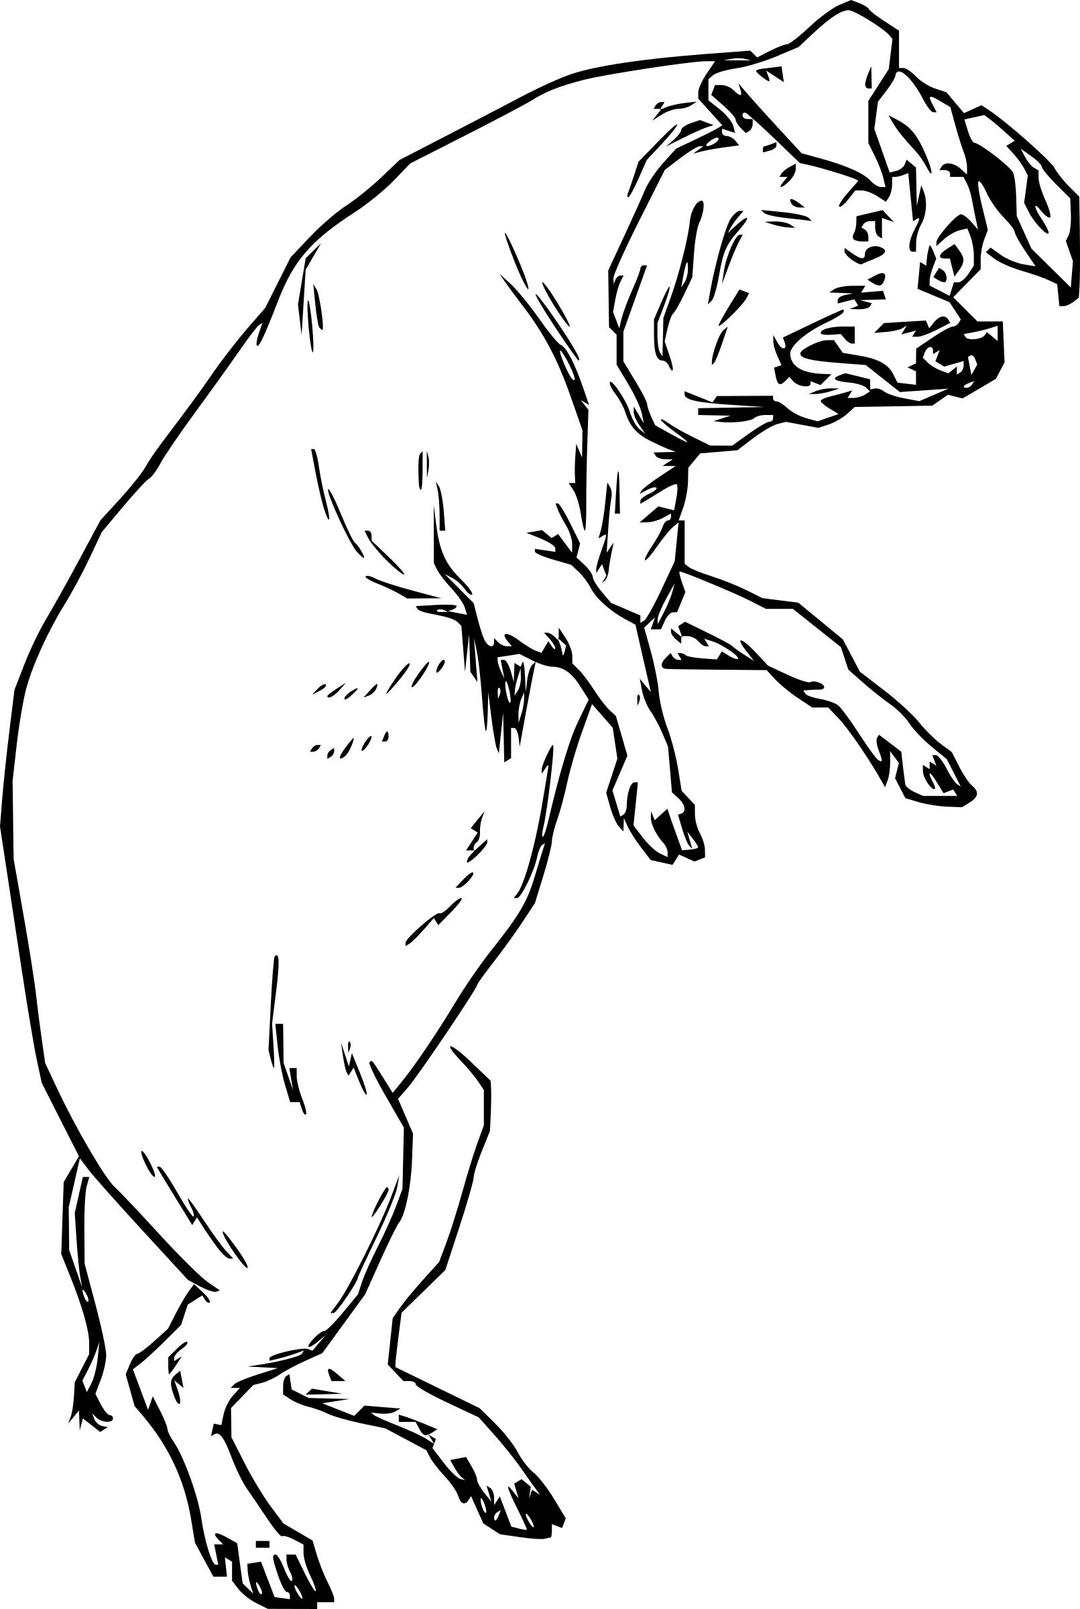 The Pig Who Had None png transparent